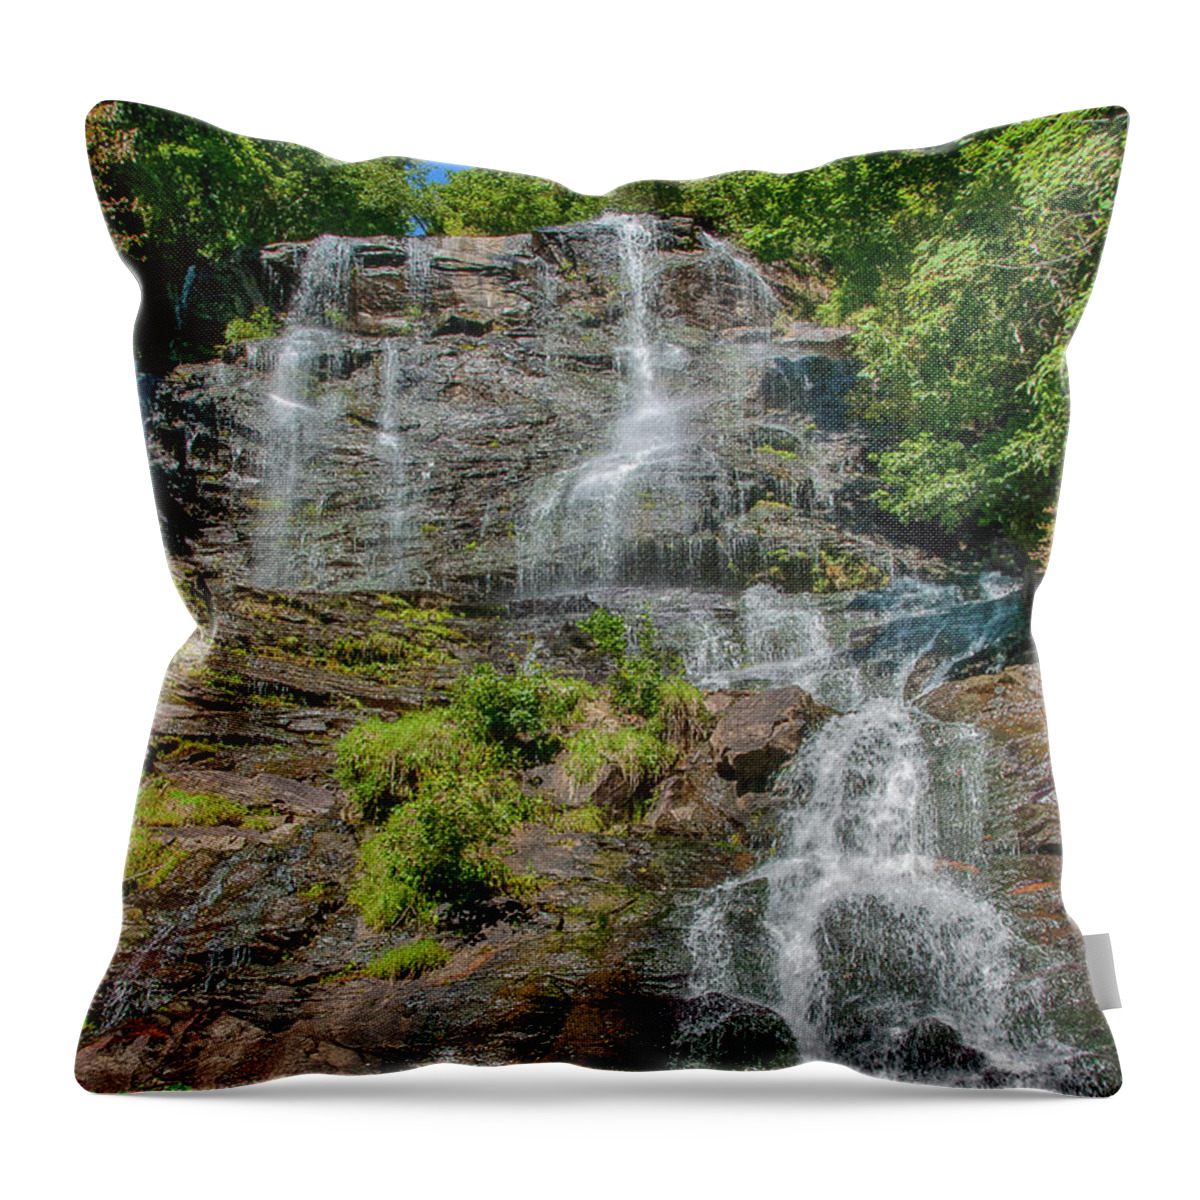 Amicalola Falls State Park Throw Pillow featuring the photograph Amicalola Falls by Spencer Studios